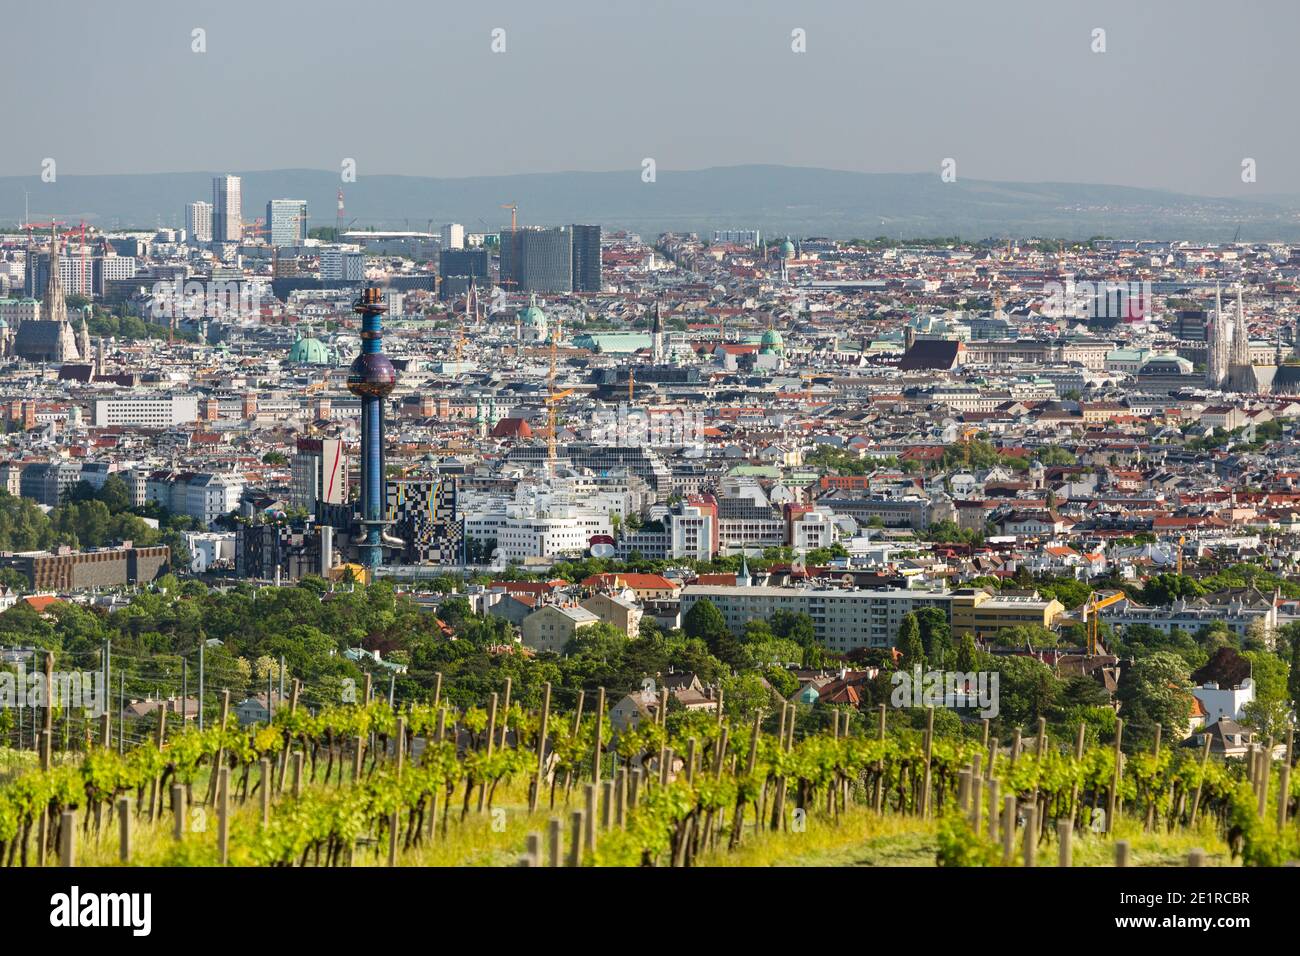 View from a hill to the city center of Vienna with the tower of the waste incineration plant Spittelau and several churches in Austria. Stock Photo